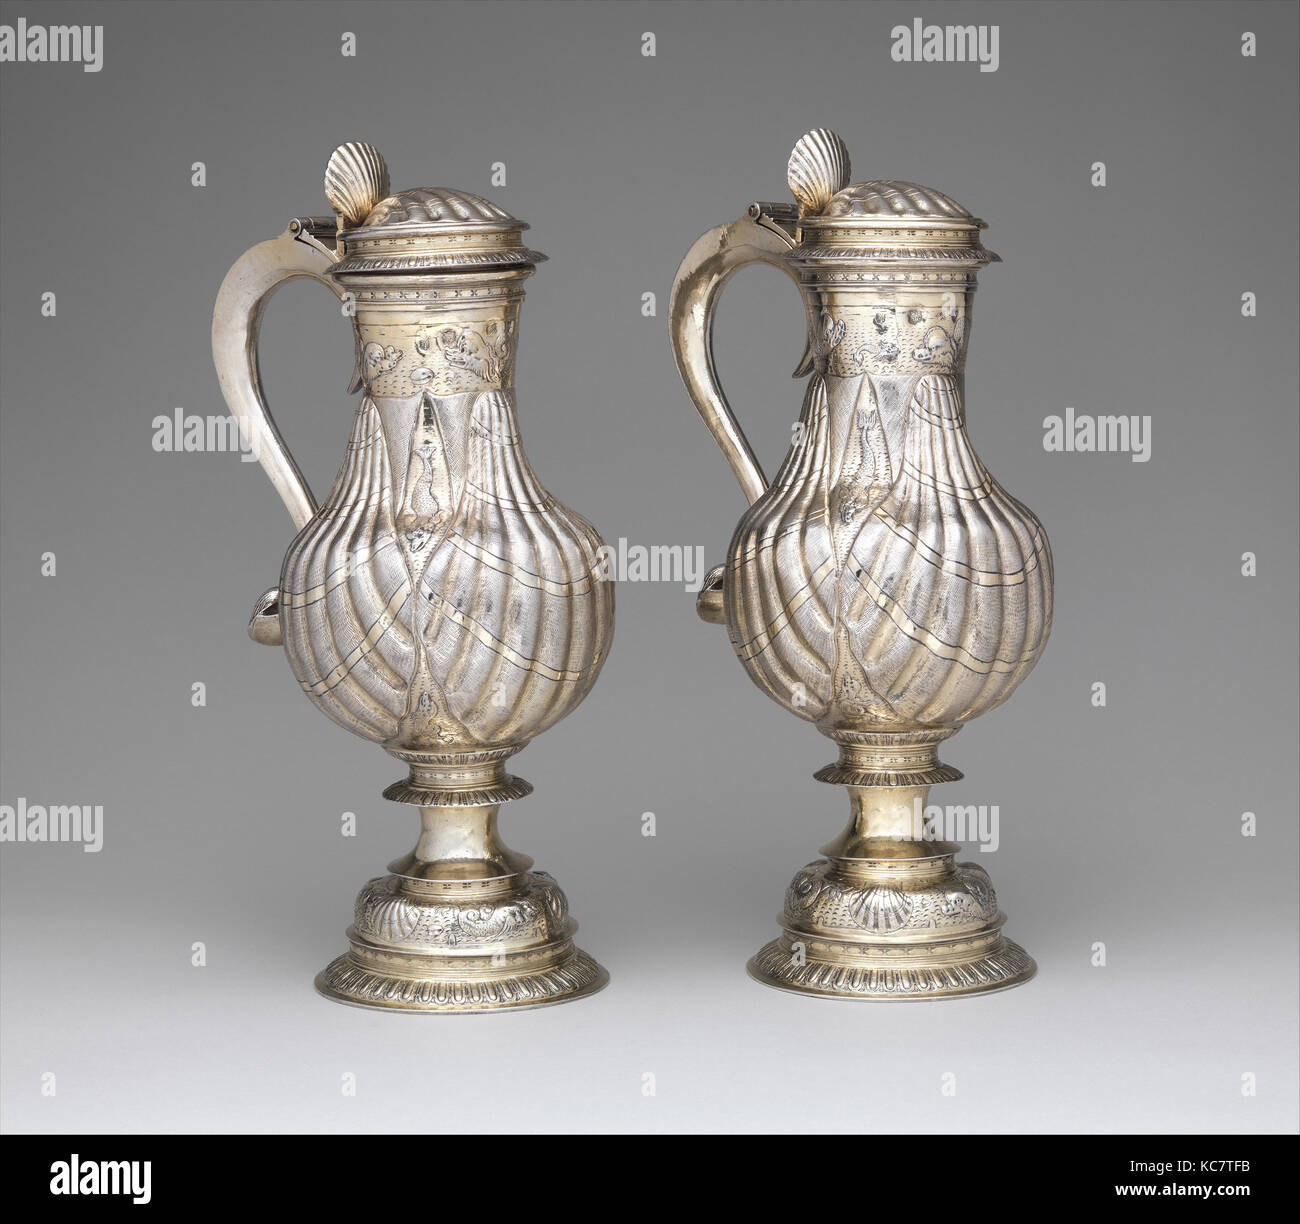 Flagon (one of a pair), 1597–98, British, London, Silver gilt, Overall (confirmed): 12 3/8 x 6 1/2 x 4 3/4 in., 36 oz. (31.4 x 1 Stock Photo